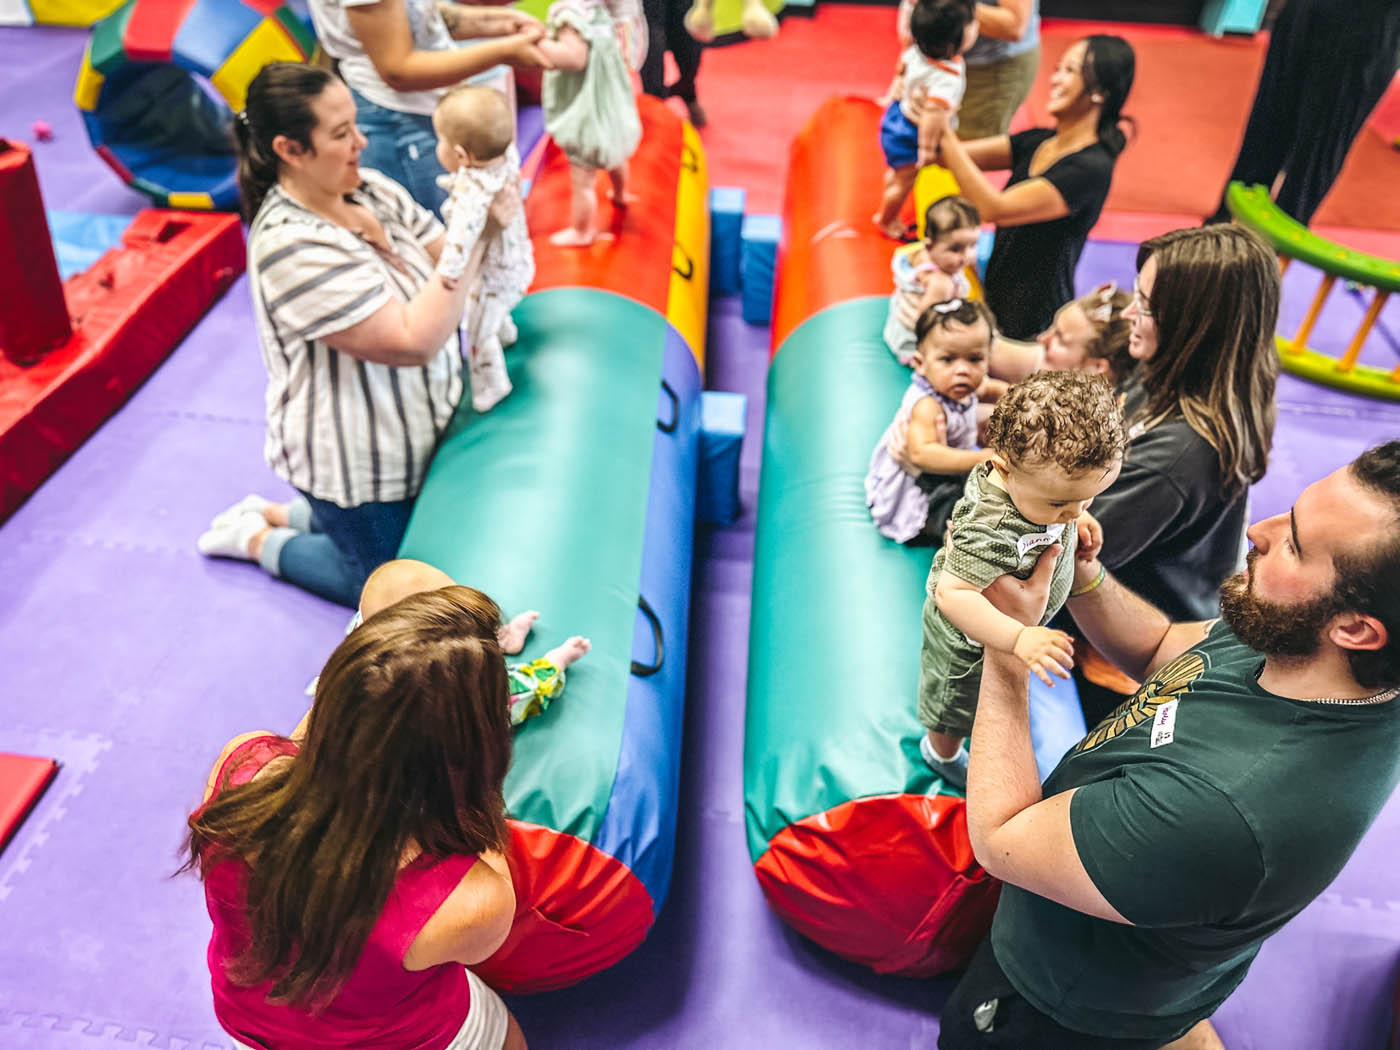 A group of parent and children enjoying Romp n' Roll St. Petersburg's gym, review our frequently asked questions at Romp n' Roll St. Petersburg.